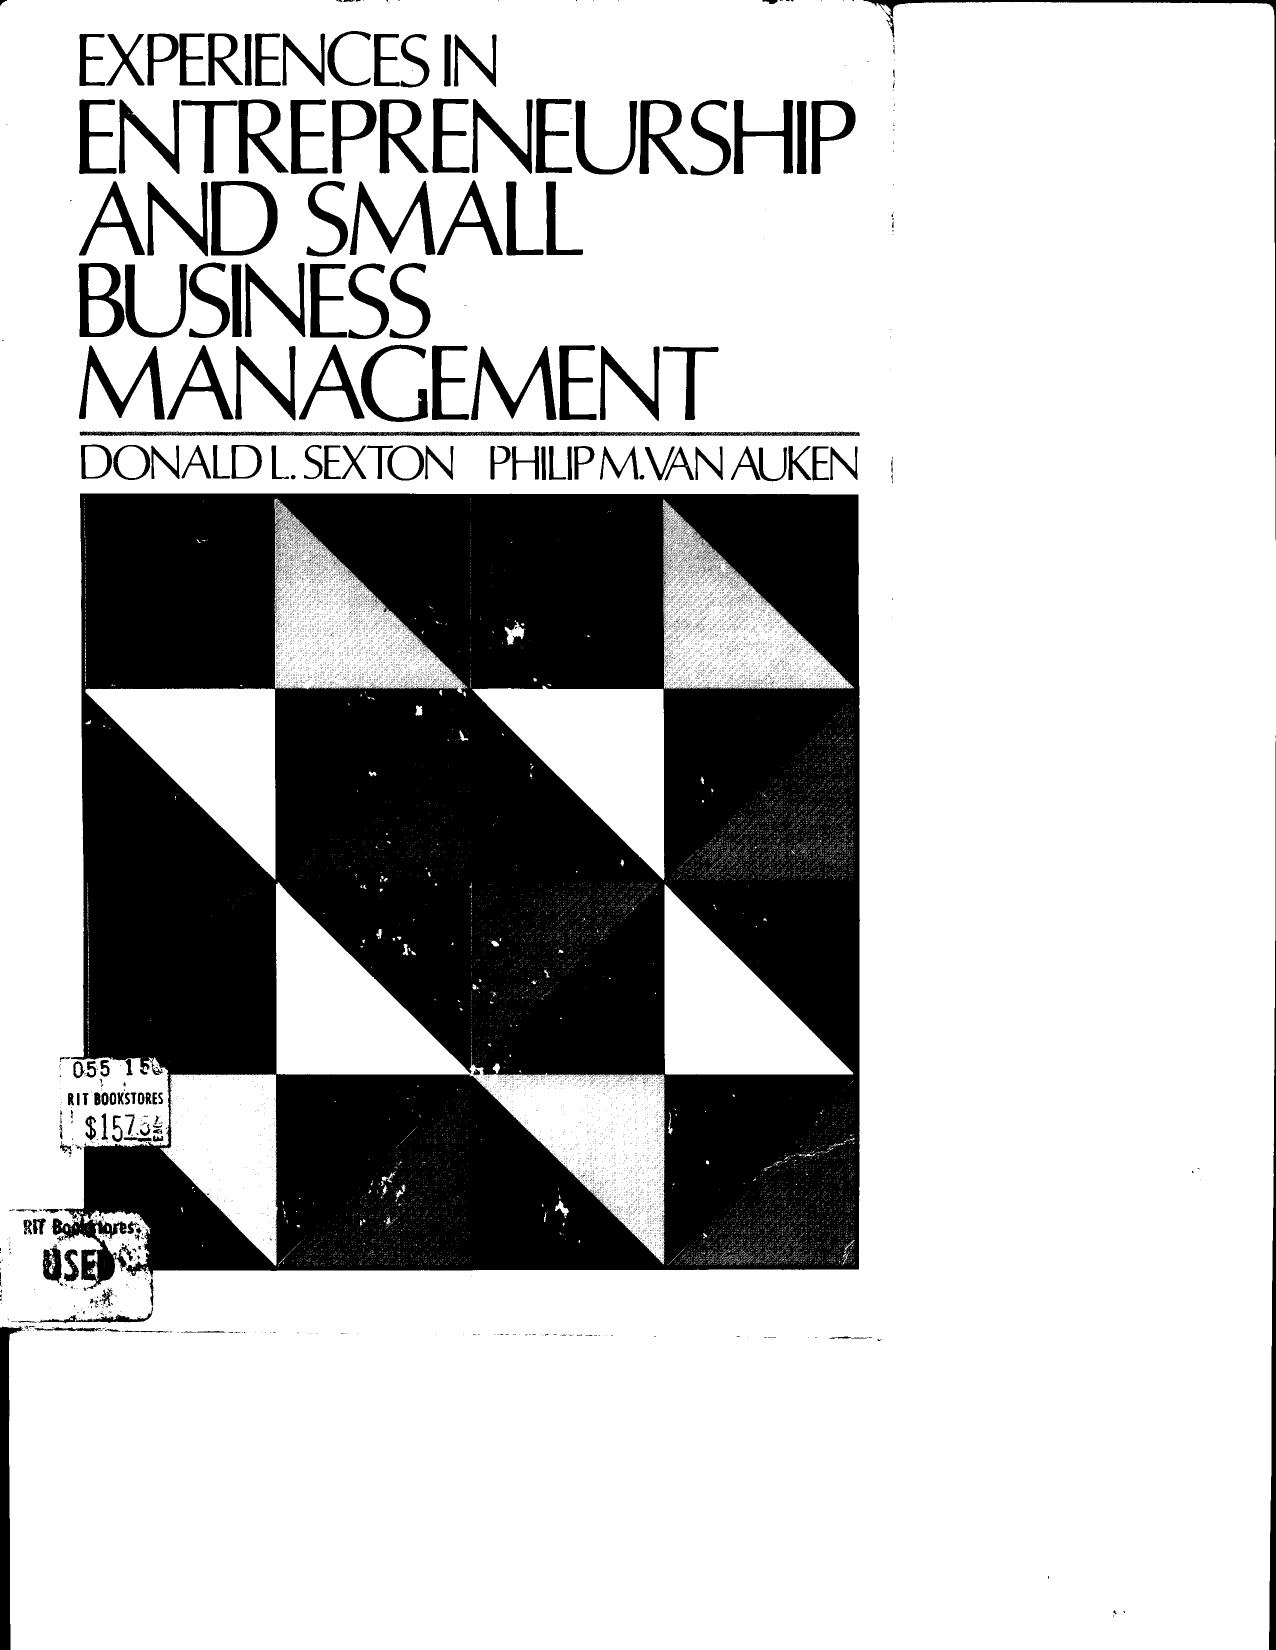 Entrep. & Small Bus Management 1982